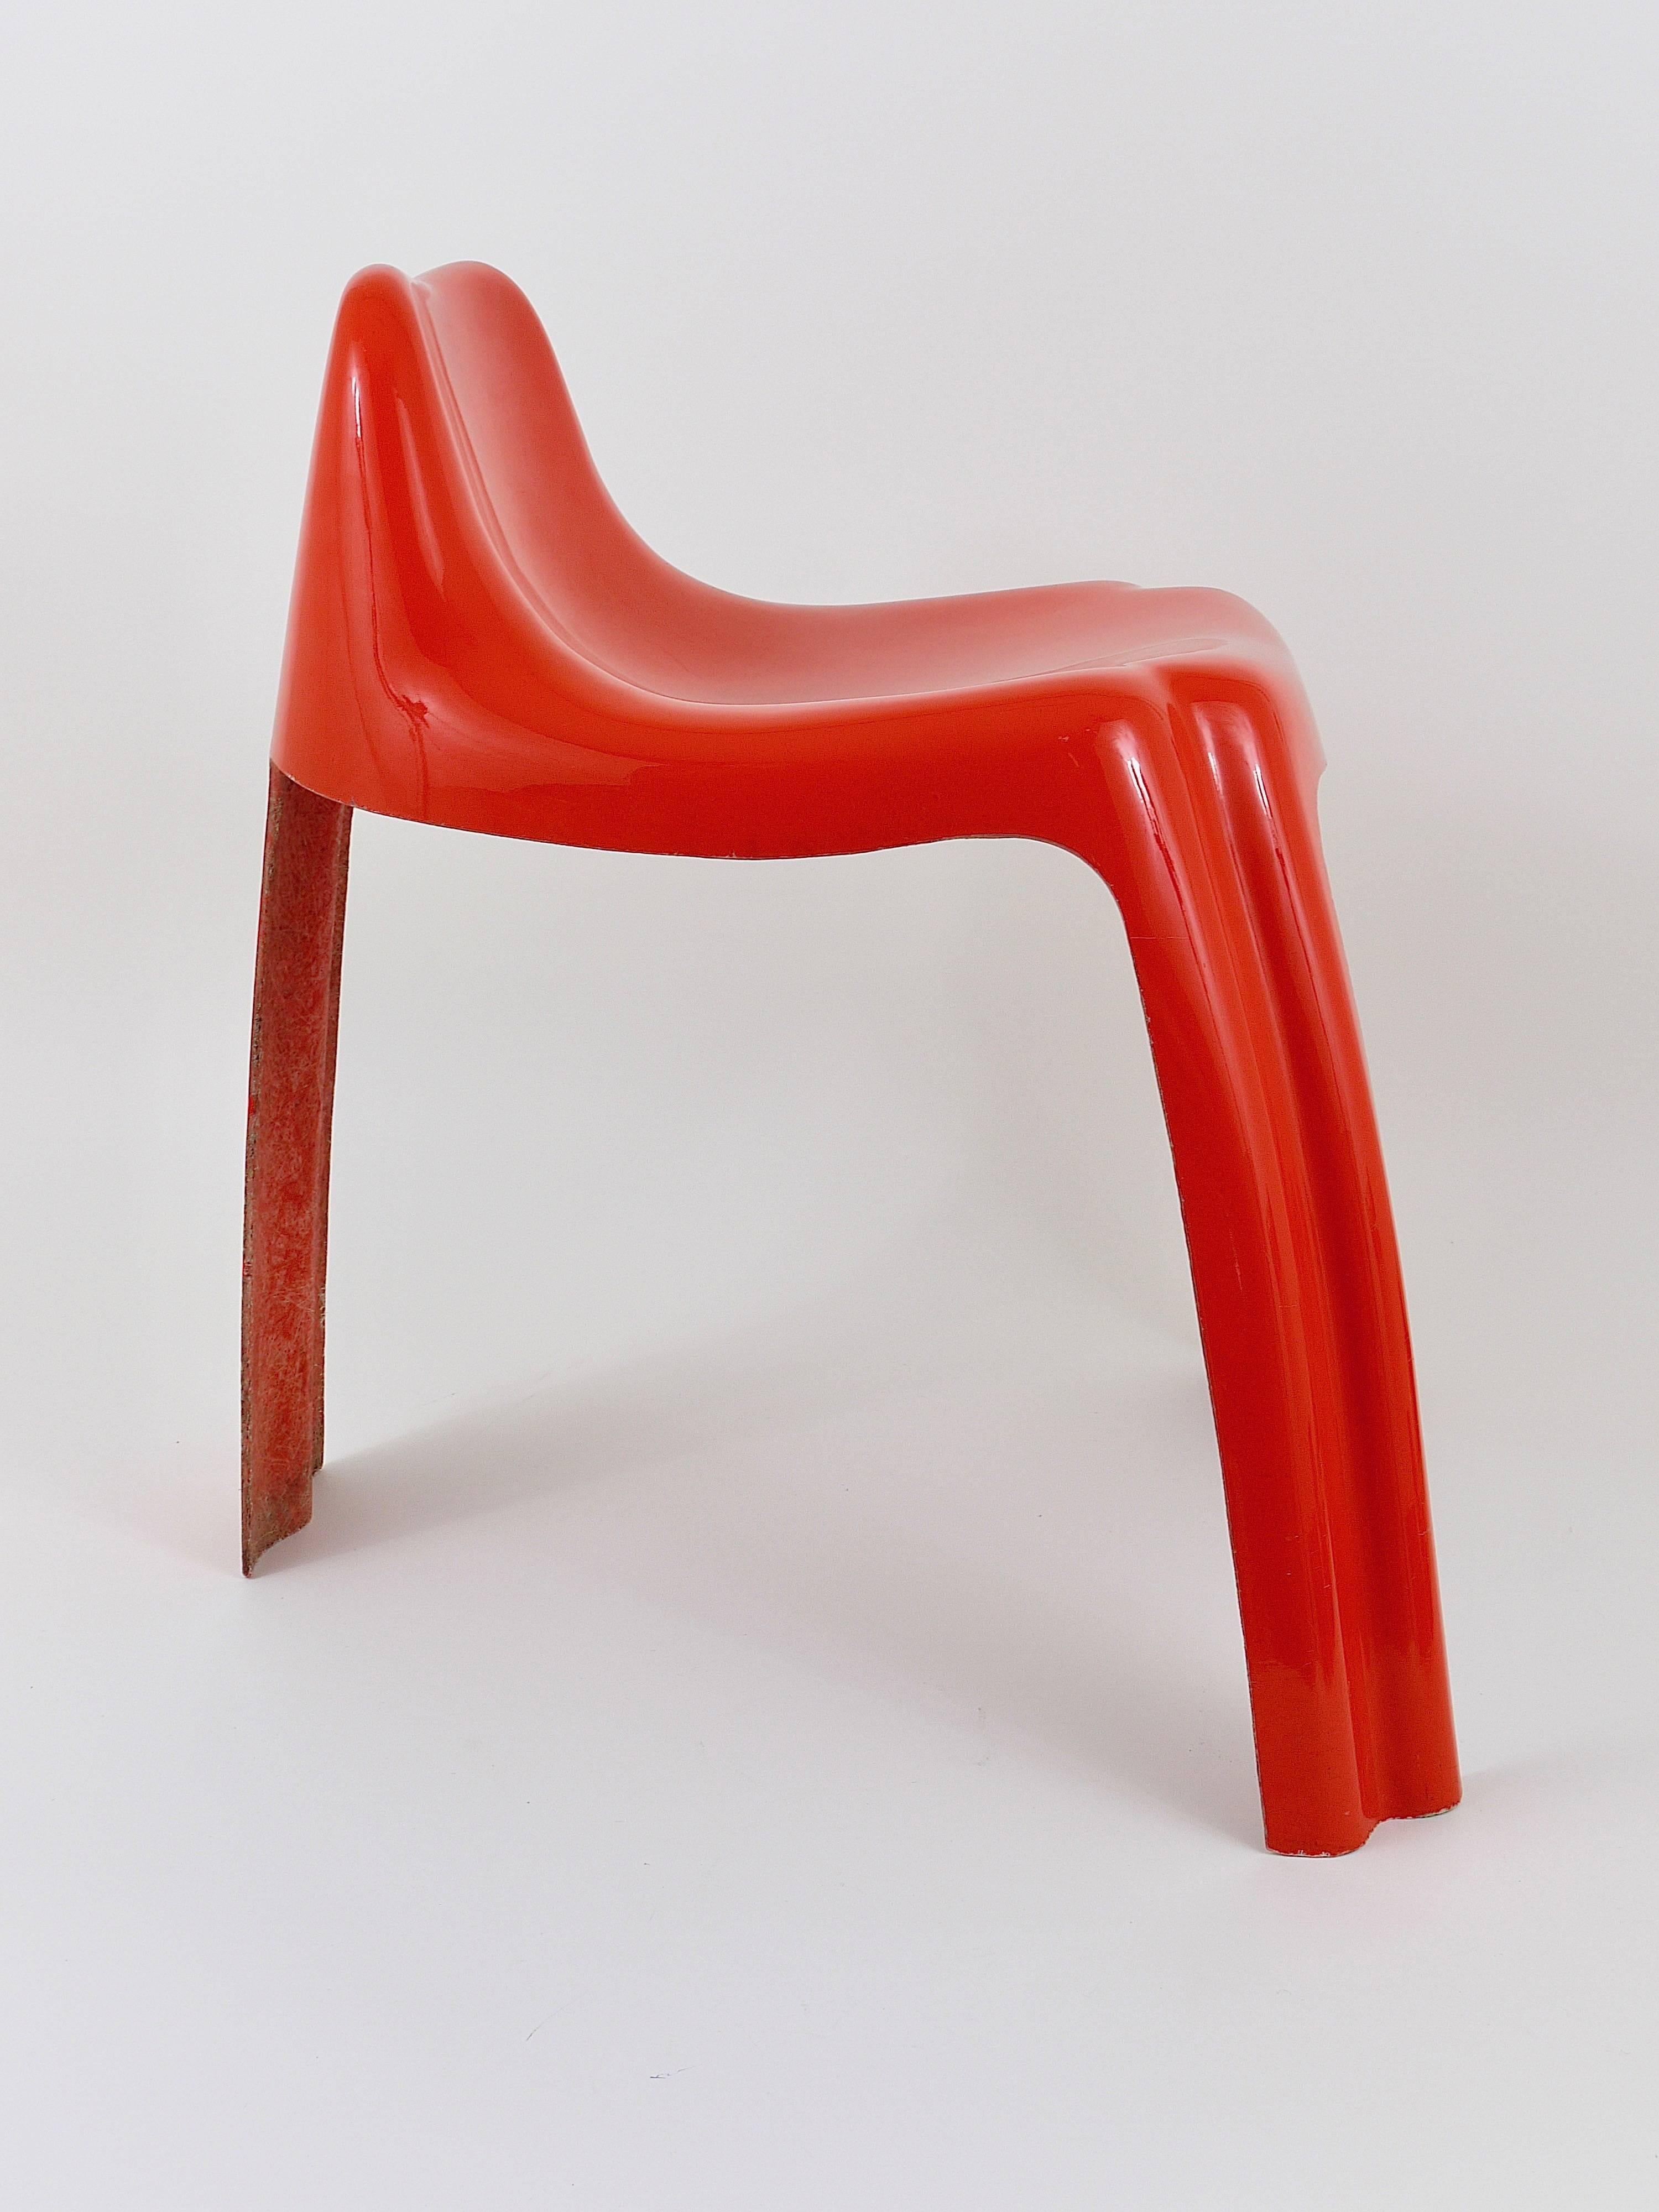 French Patrick Gingembre Ginger Orange Fiberglass Chair Ginger, Paulus, France, 1970s For Sale